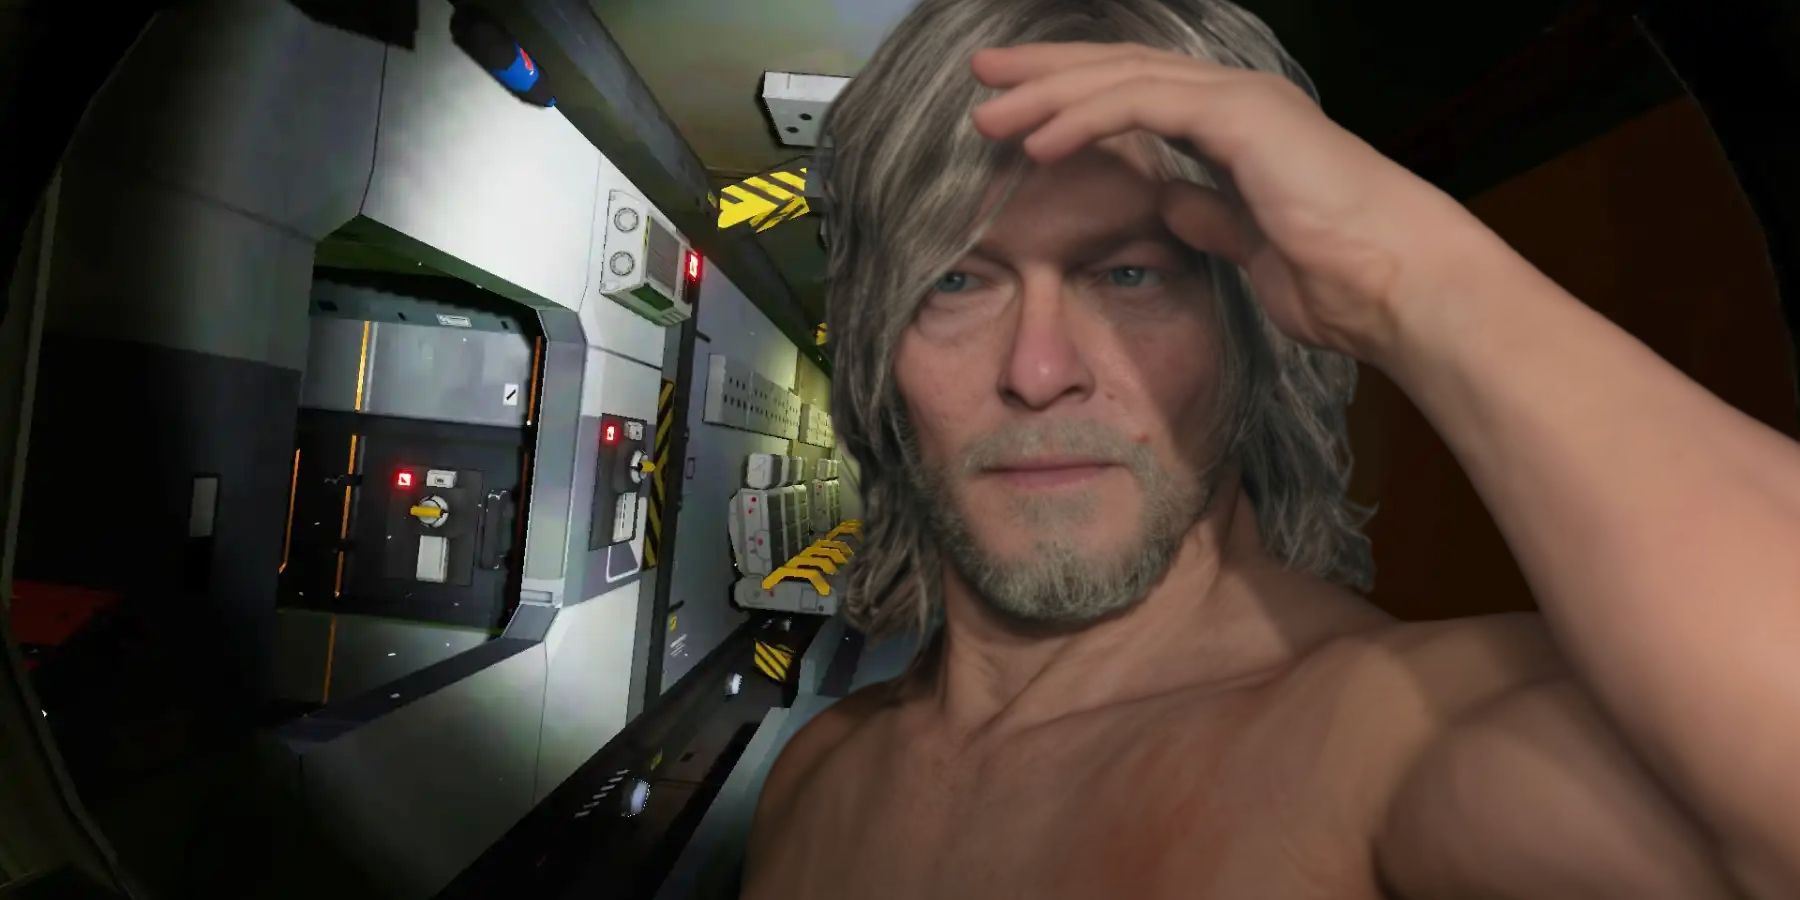 Possible Reasons Why Sam is So Old in Death Stranding 2